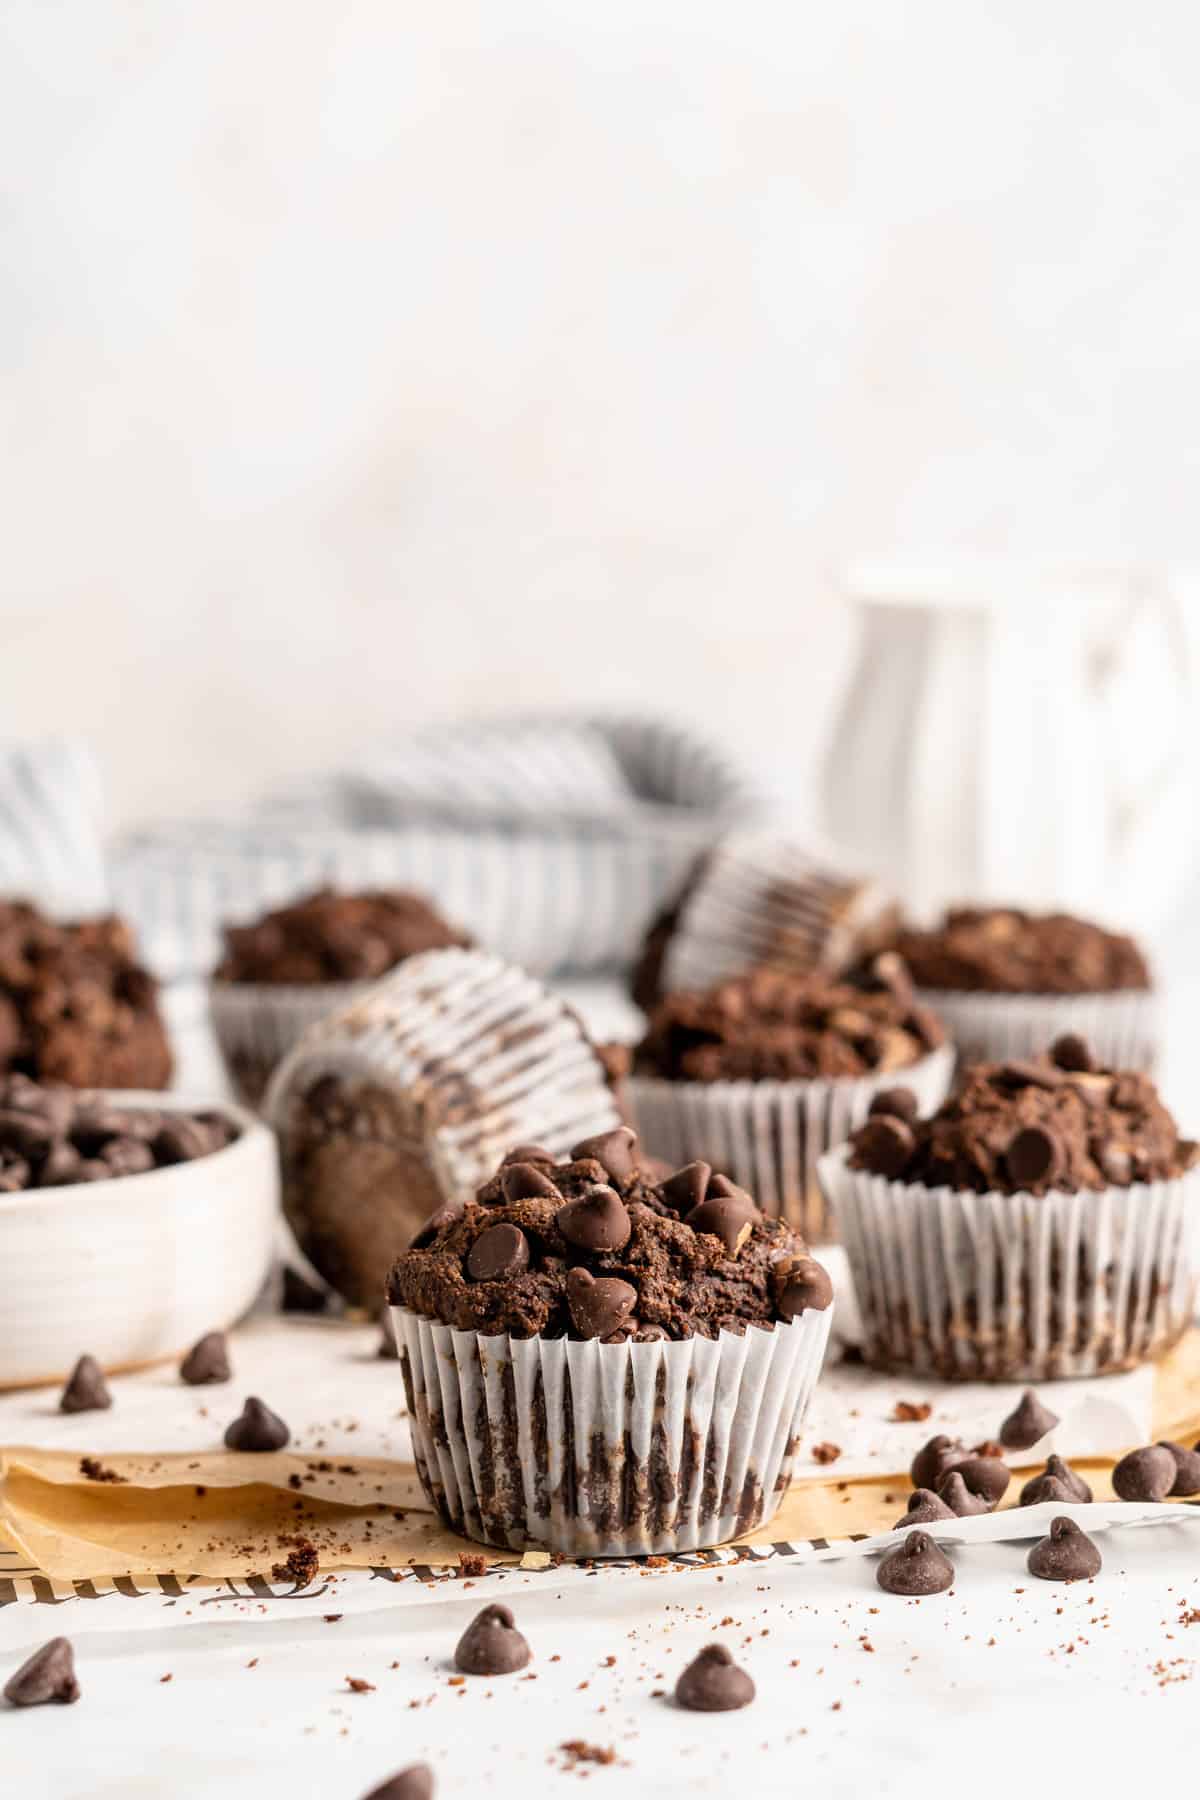 Chocolate Banana Muffins surrounded by chocolate chips